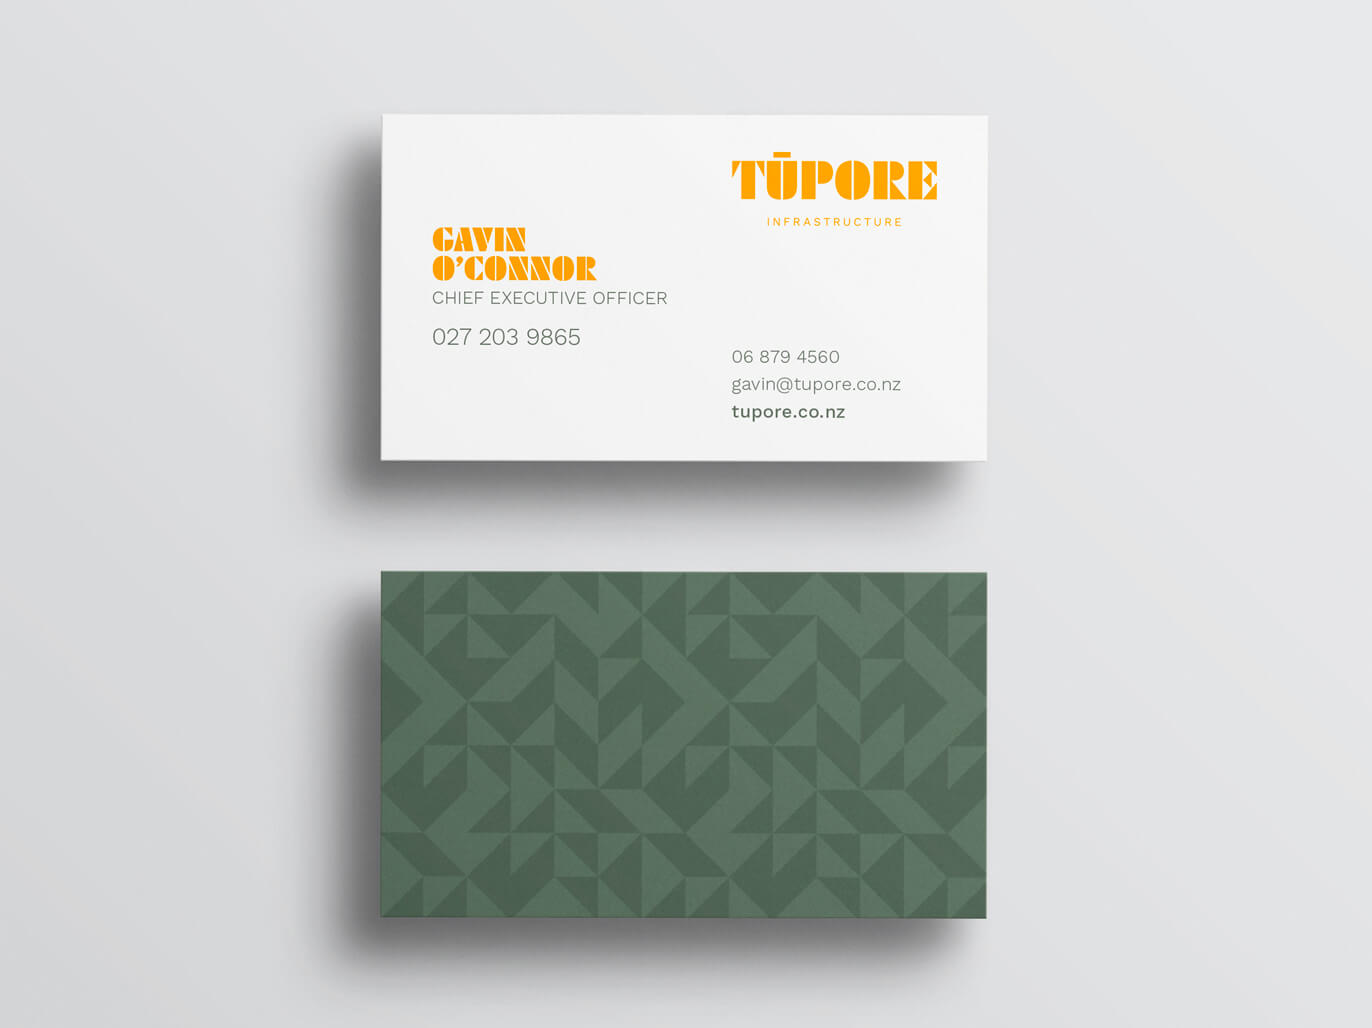 Many-Hats-Tupore-infrastructure-business-cards